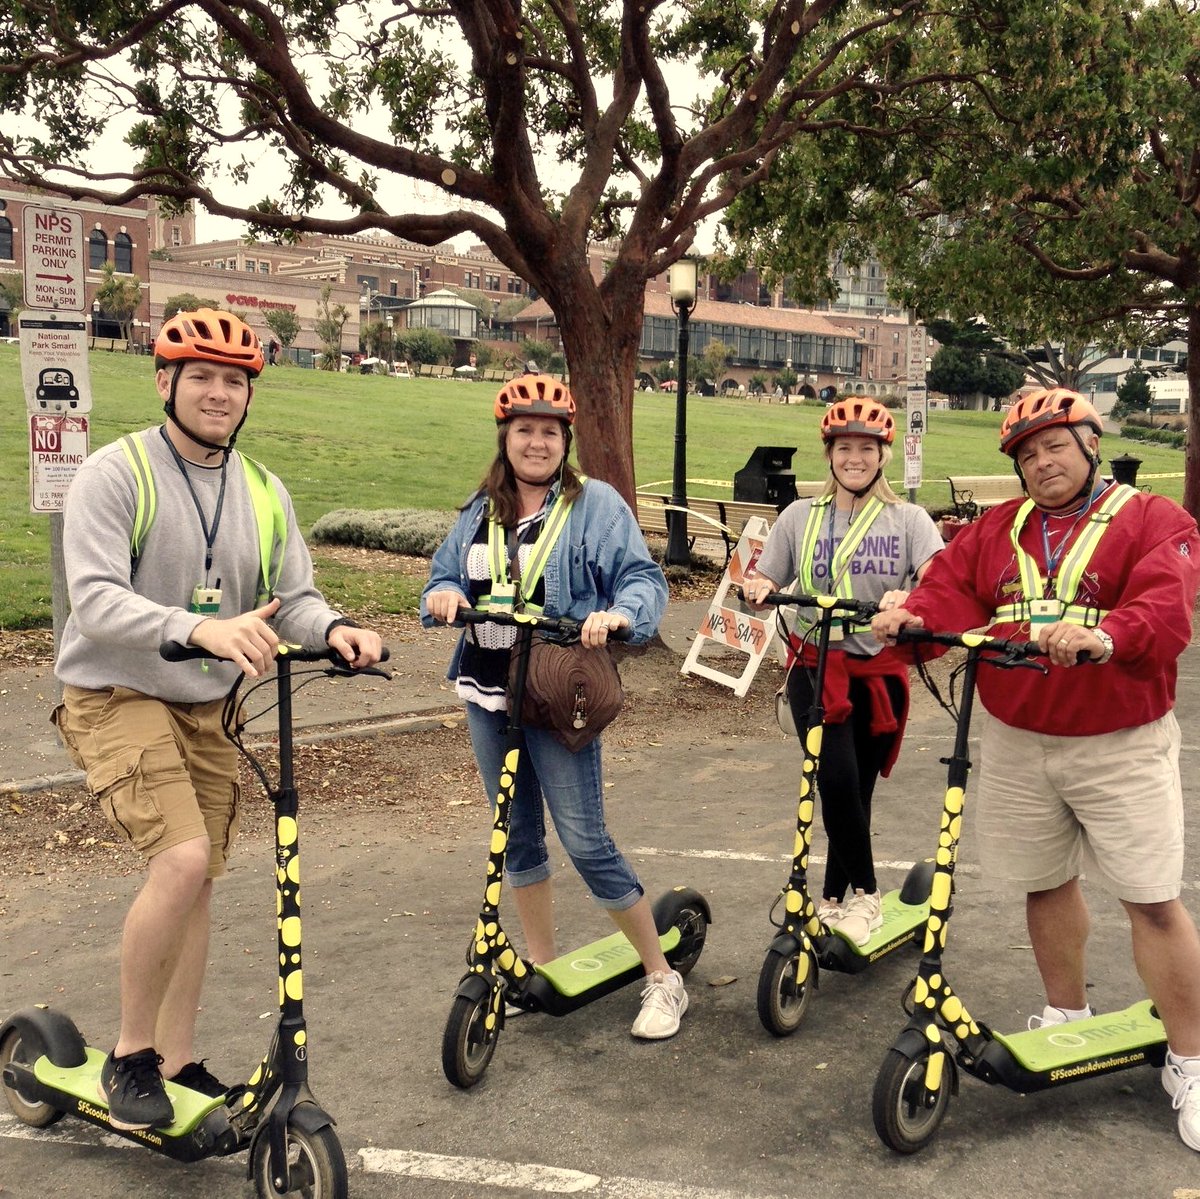 After a brief session on how to safely operate the electric scooter, you will explore San Francisco’s Waterfront for approximately 2.5 hours. 

Call 415-474-3130 soo.nr/2HAM

#sfscootertour #seethesights #alcatraz  #goldengatebridge #sanfranciscobay #bucketlist